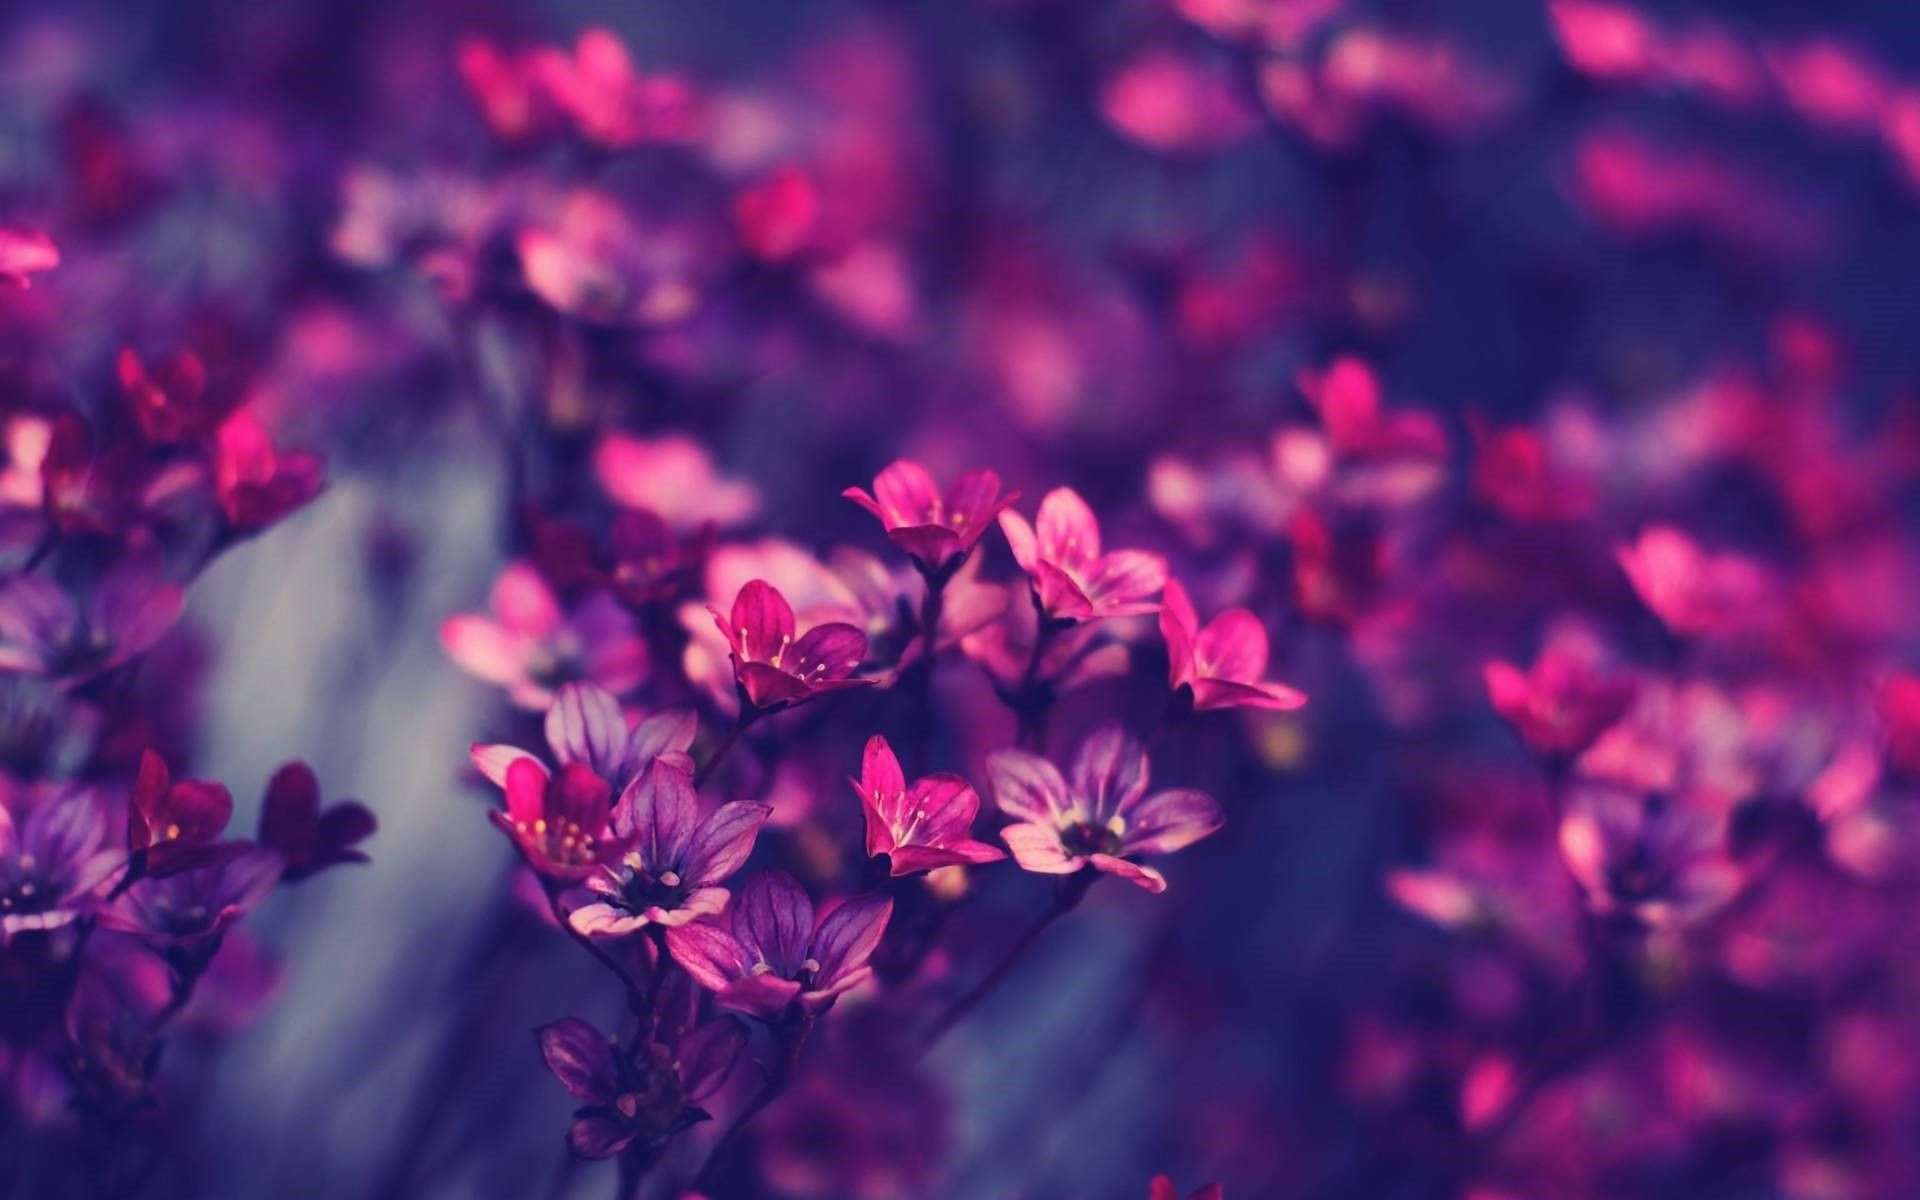 1920x1200 Pretty Desktop Wallpapers Discounted Prices, 51% OFF |